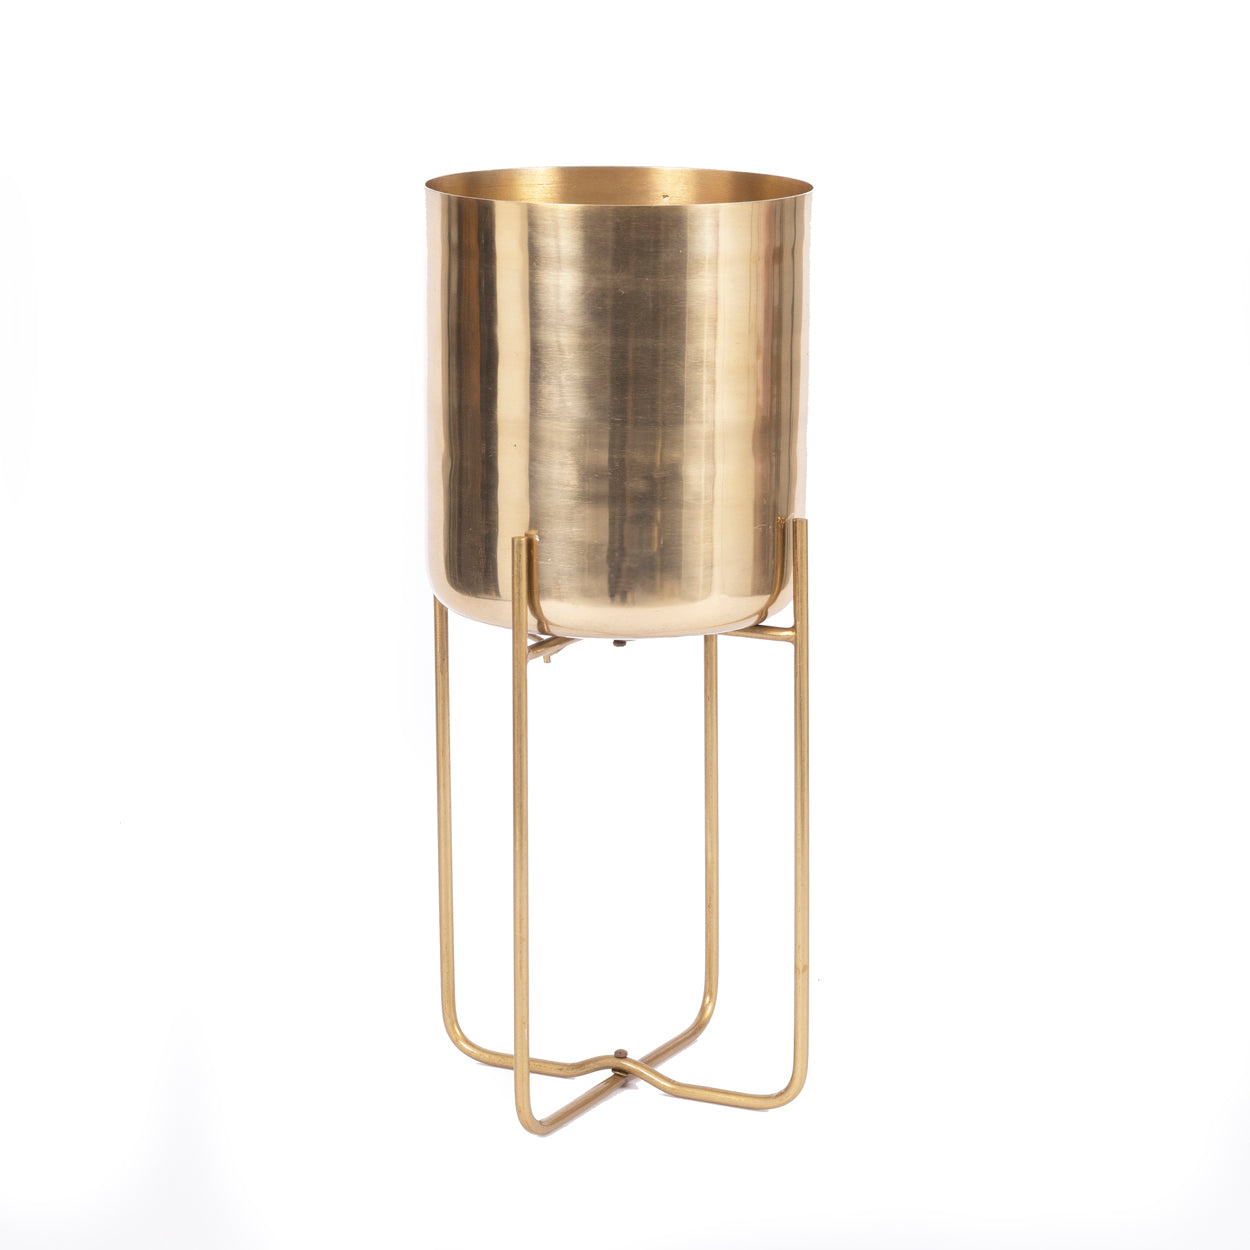 THE BRASS Planter On Stand medium front view